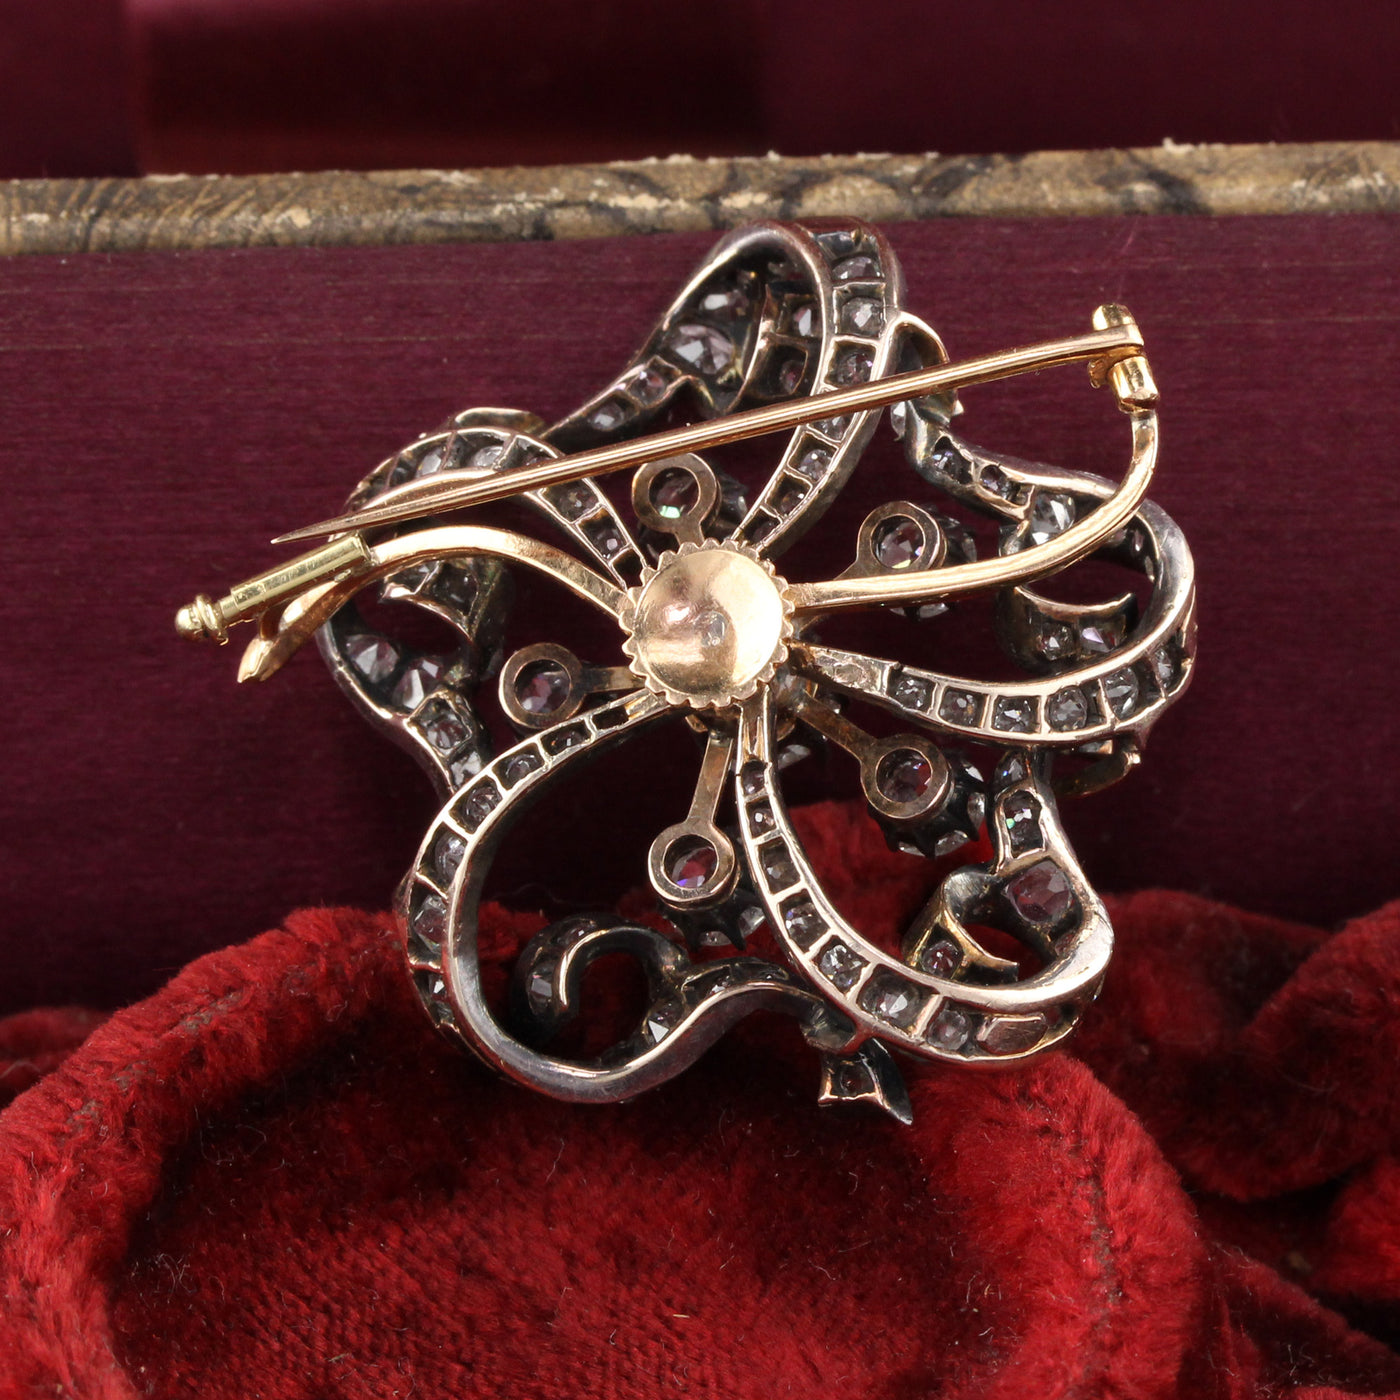 Antique Victorian 18K Yellow Gold, Silver Top & Diamond Flower Pin Brooch - The Antique Parlour